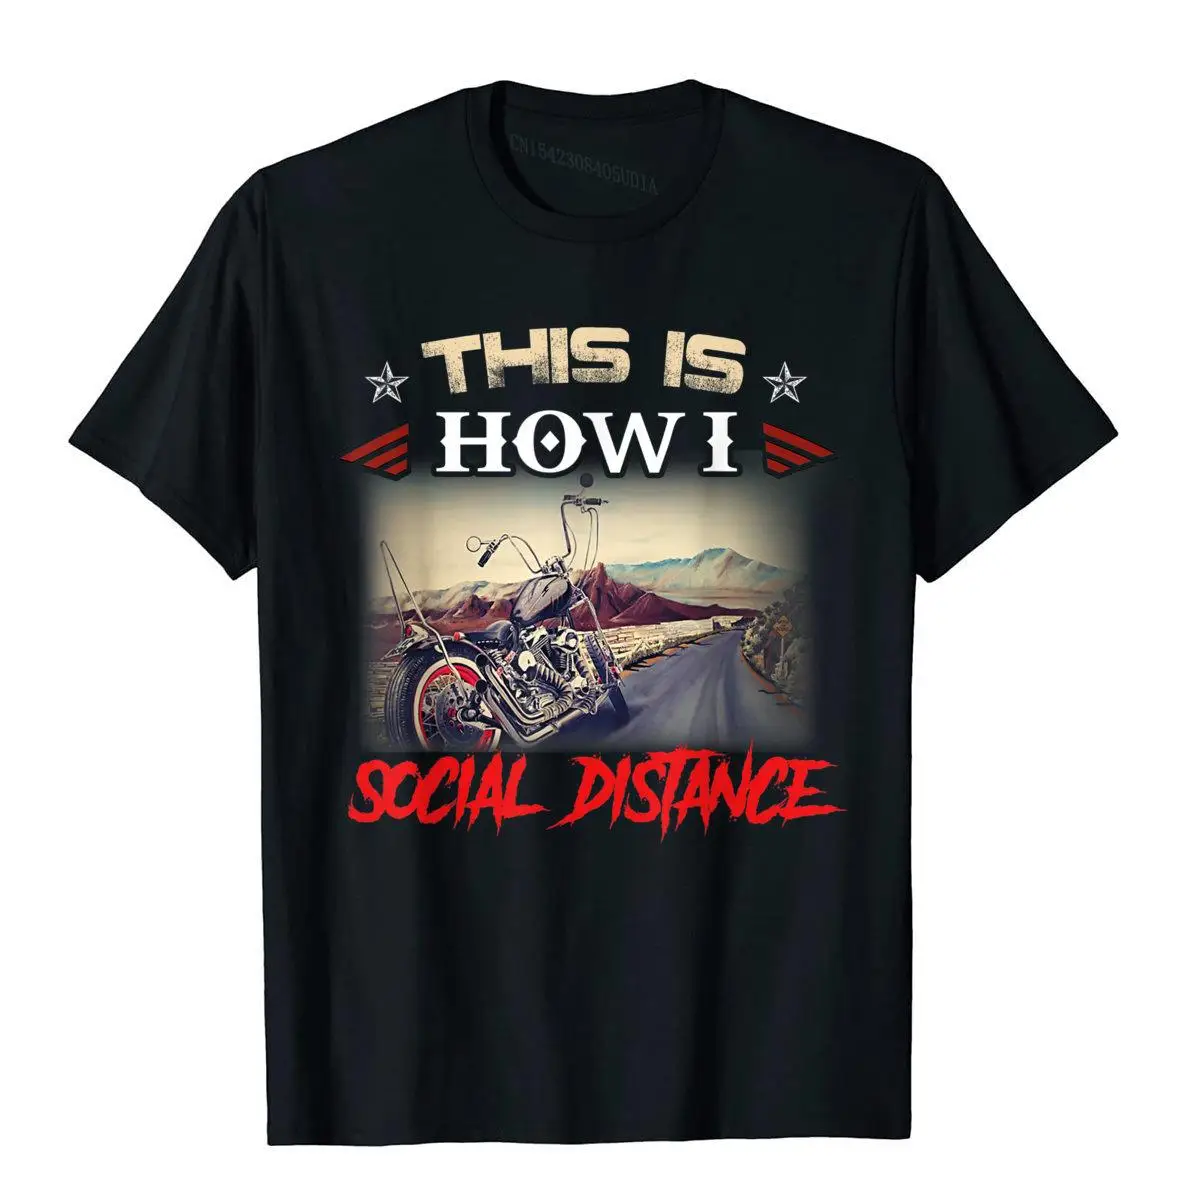 

This Is How I Social Distance Funny Motorcycle Biker Quotes T-Shirt Anime Tops & Tees Cotton Men's Top T-Shirts Printed Slim Fit